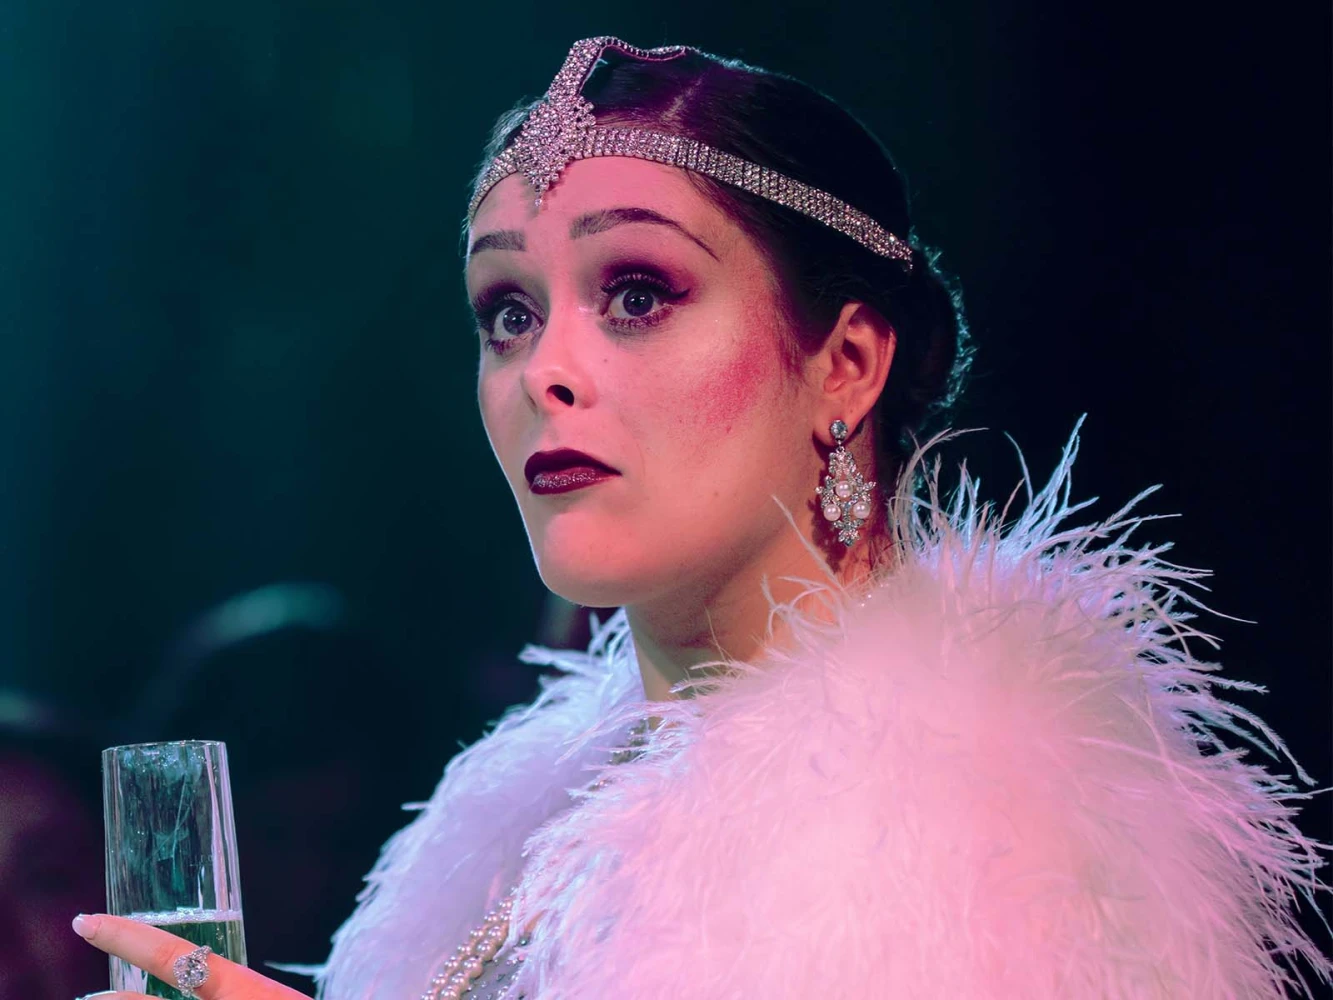 The Great Gatsby: The Immersive Show: What to expect - 5